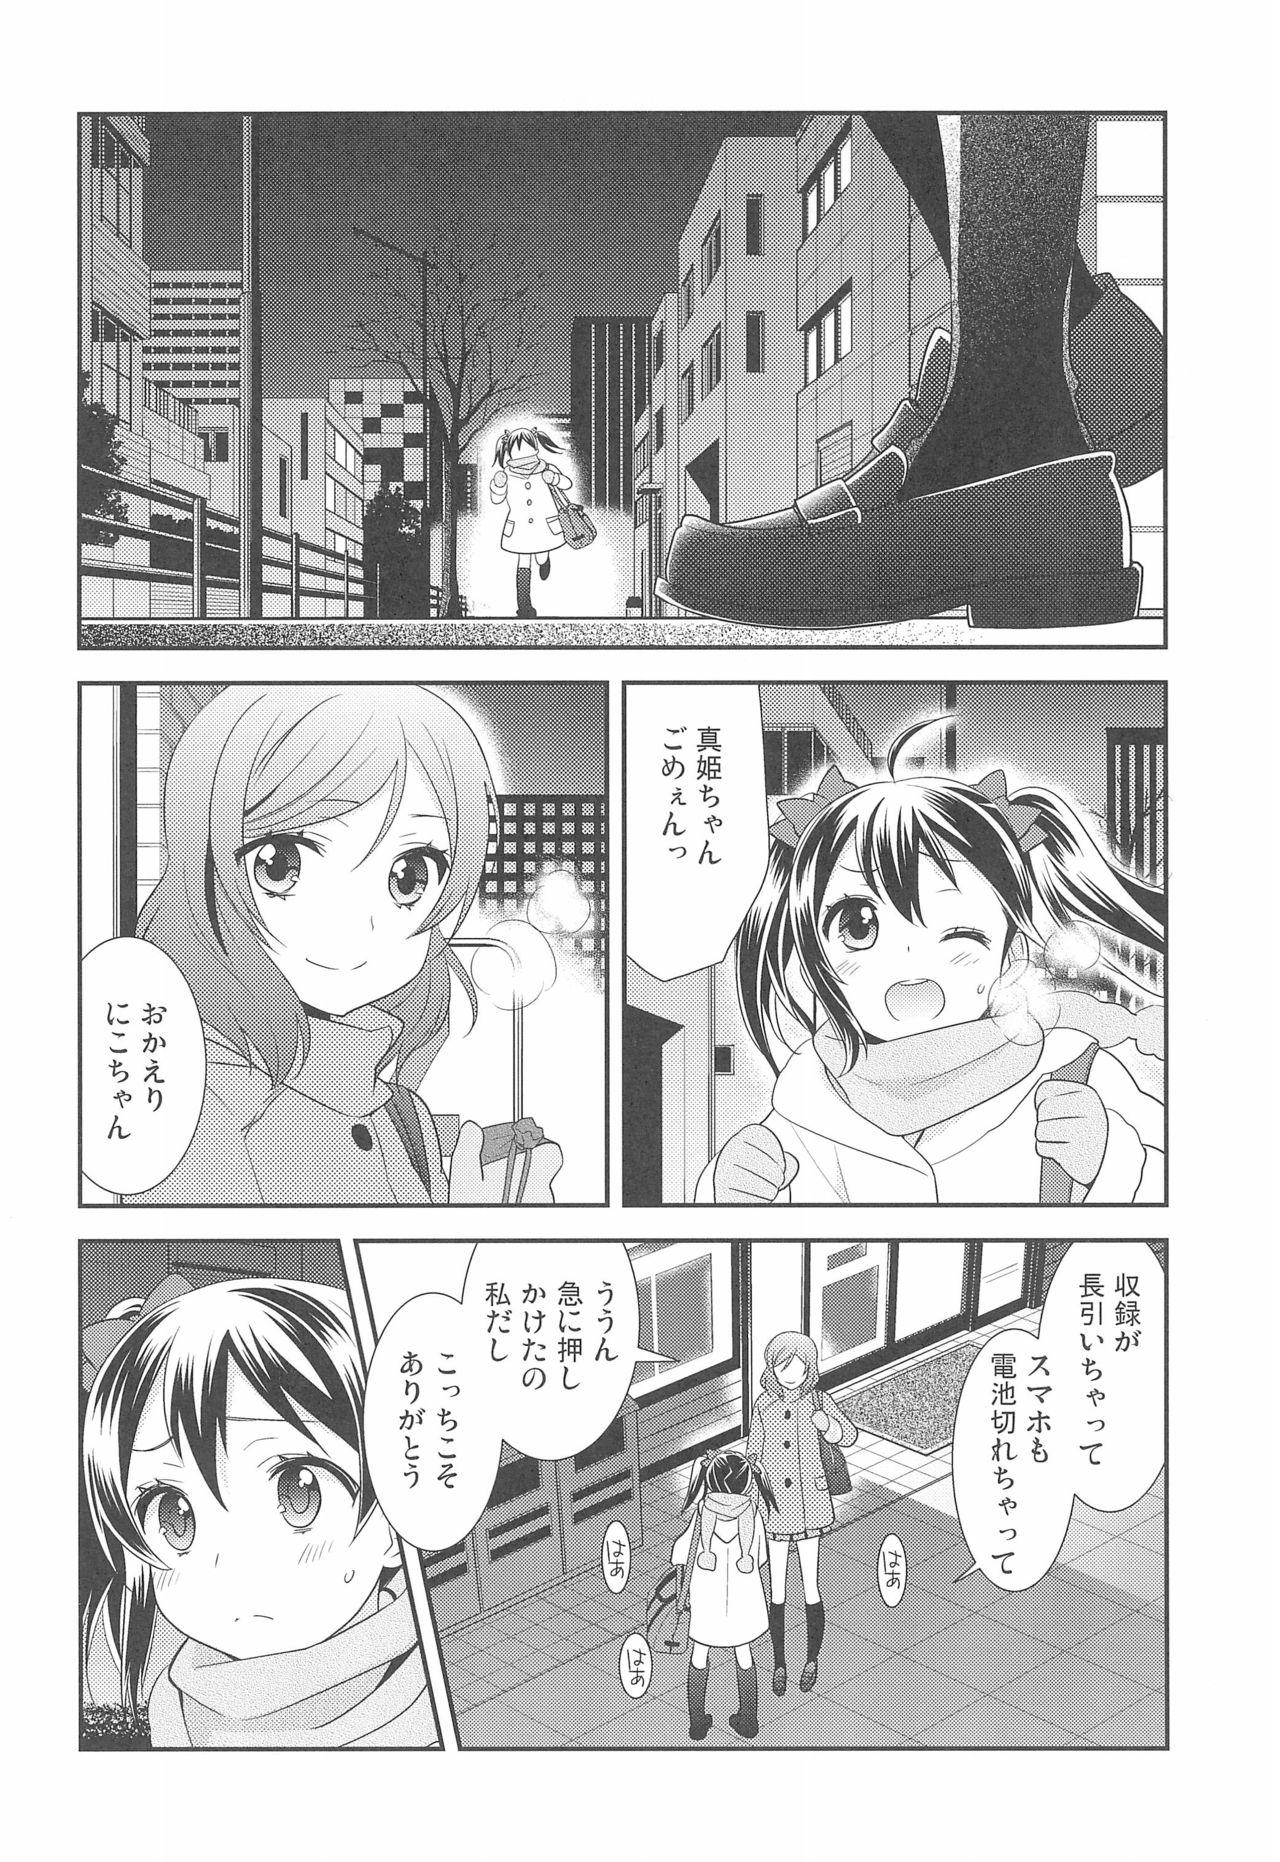 Best Blowjobs BABY I LOVE YOU - Love live Tongue - Page 4